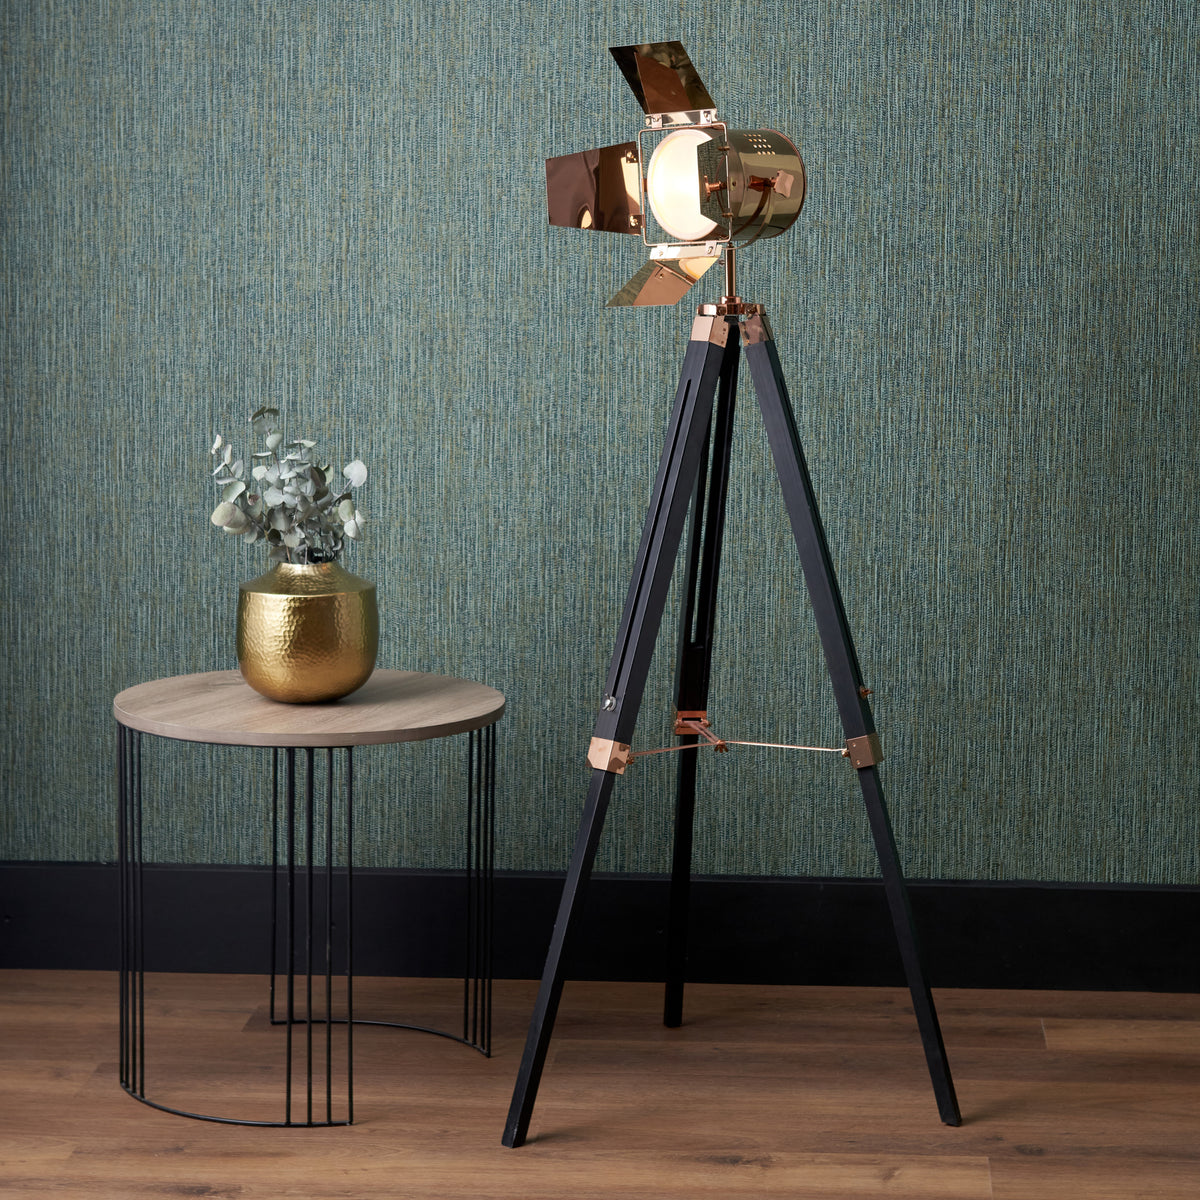 Hereford Copper and Black Tripod Floor Lamp for living room